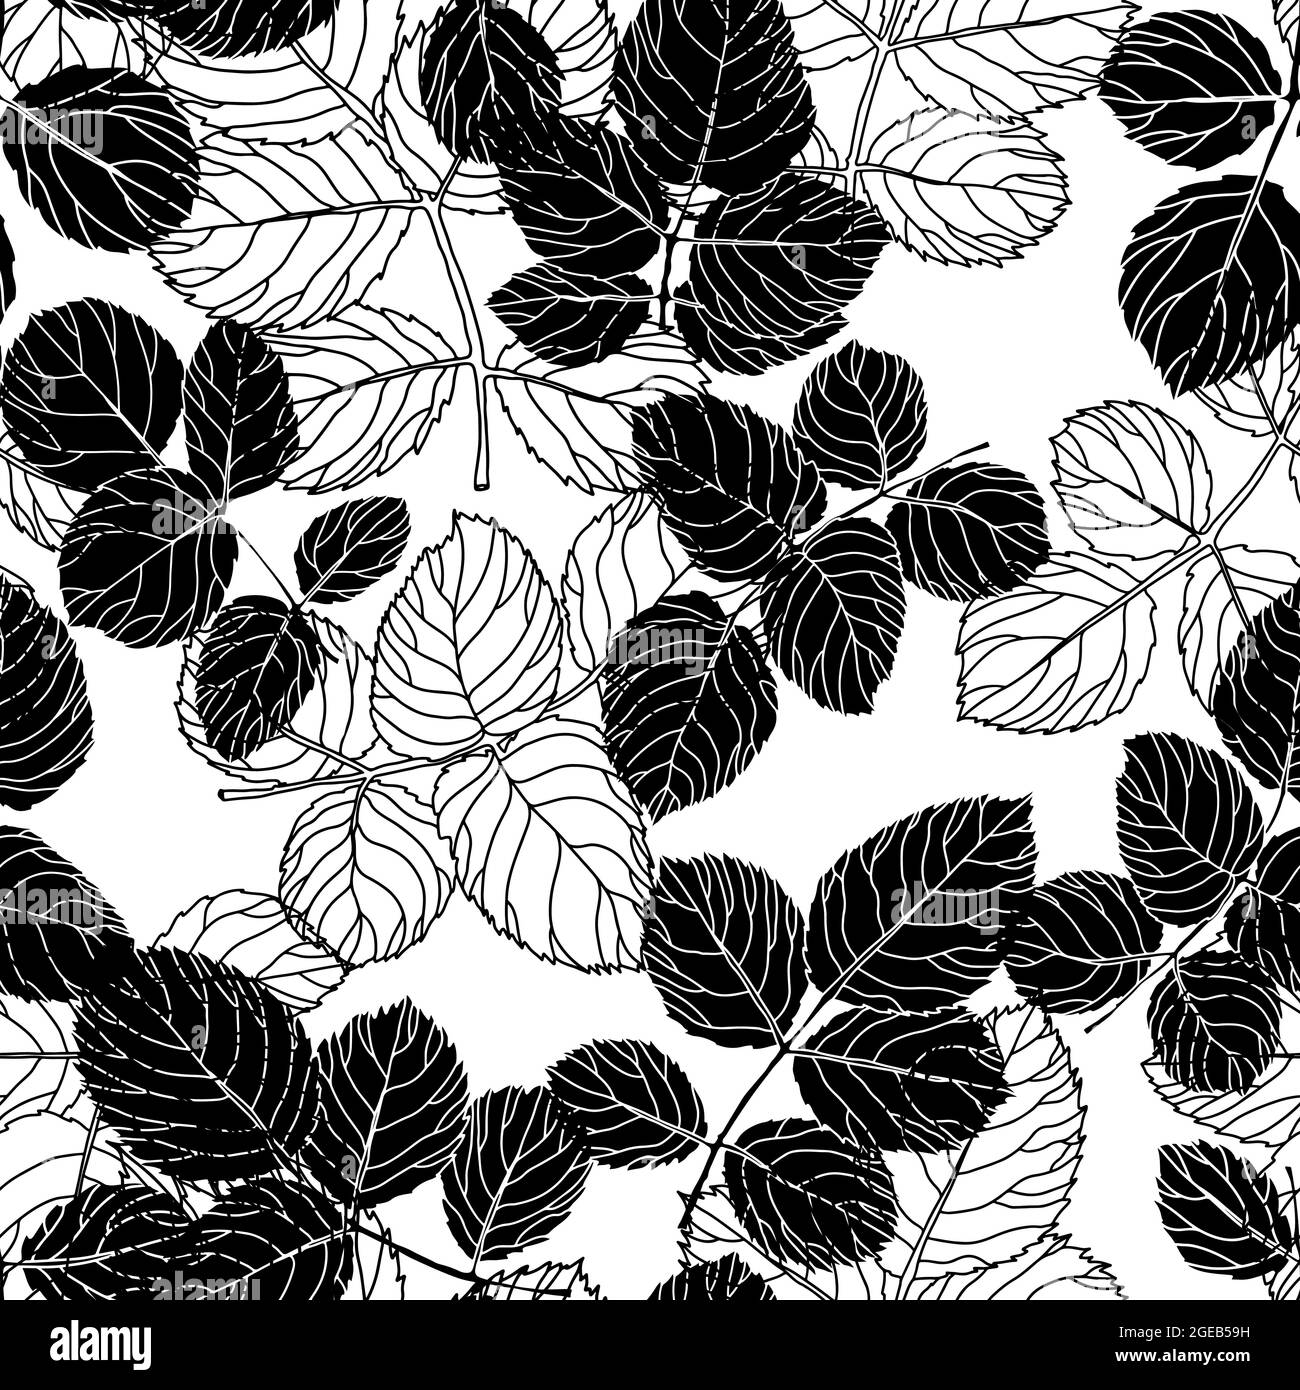 Foliage and flowers, leaves silhouette pattern Stock Vector